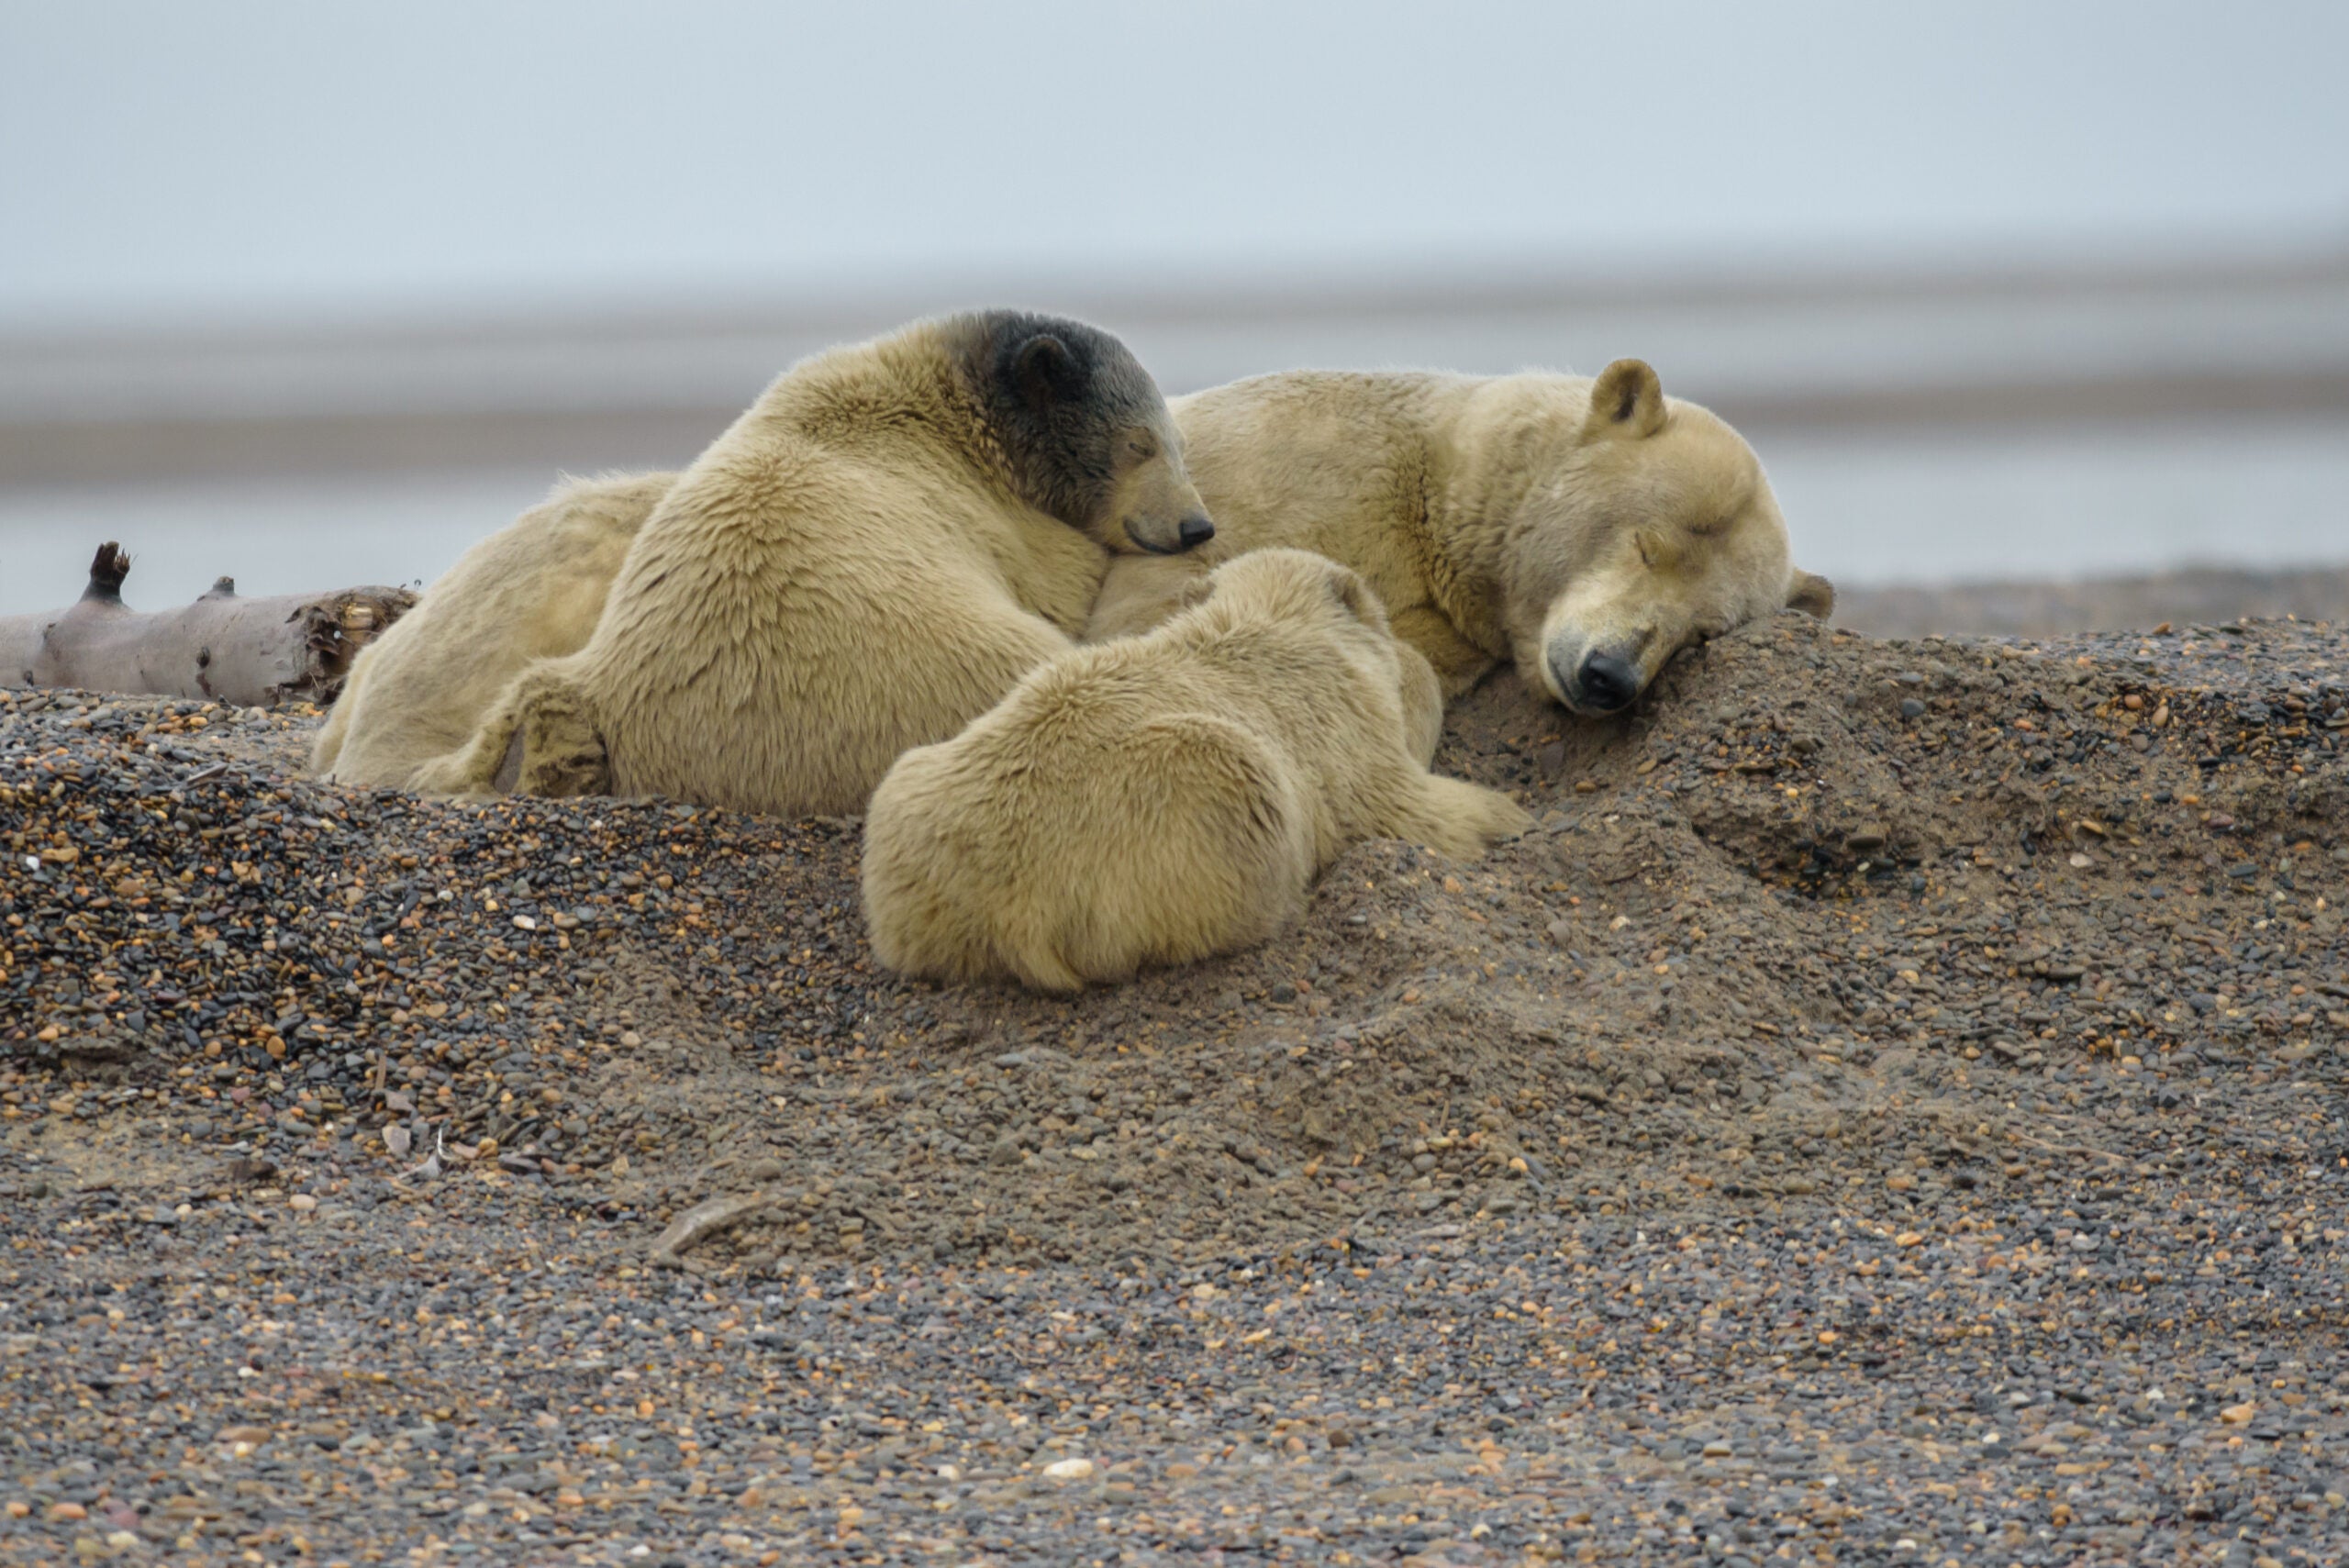 Oil drilling in the Arctic National Wildlife Refuge threatens the habitats of a wide range of wildlife, including polar bears, Arctic foxes and wolverines.